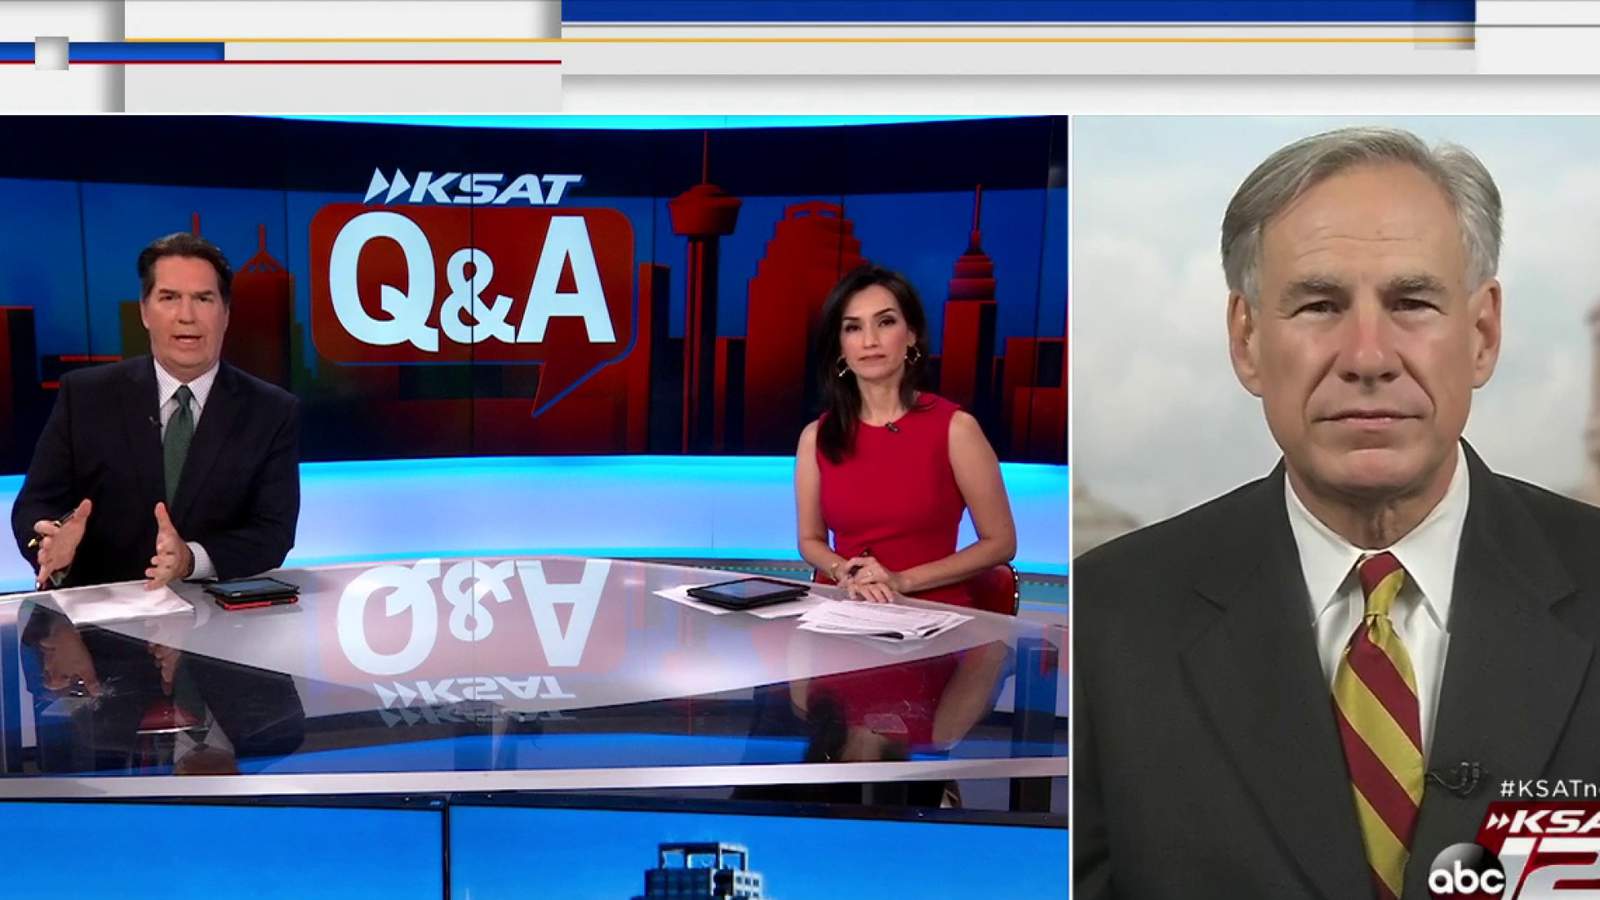 KSAT Q & A: Governor Greg Abbott talks to anchors Steve Spriester and Isis Romero about current issues in the state of Texas